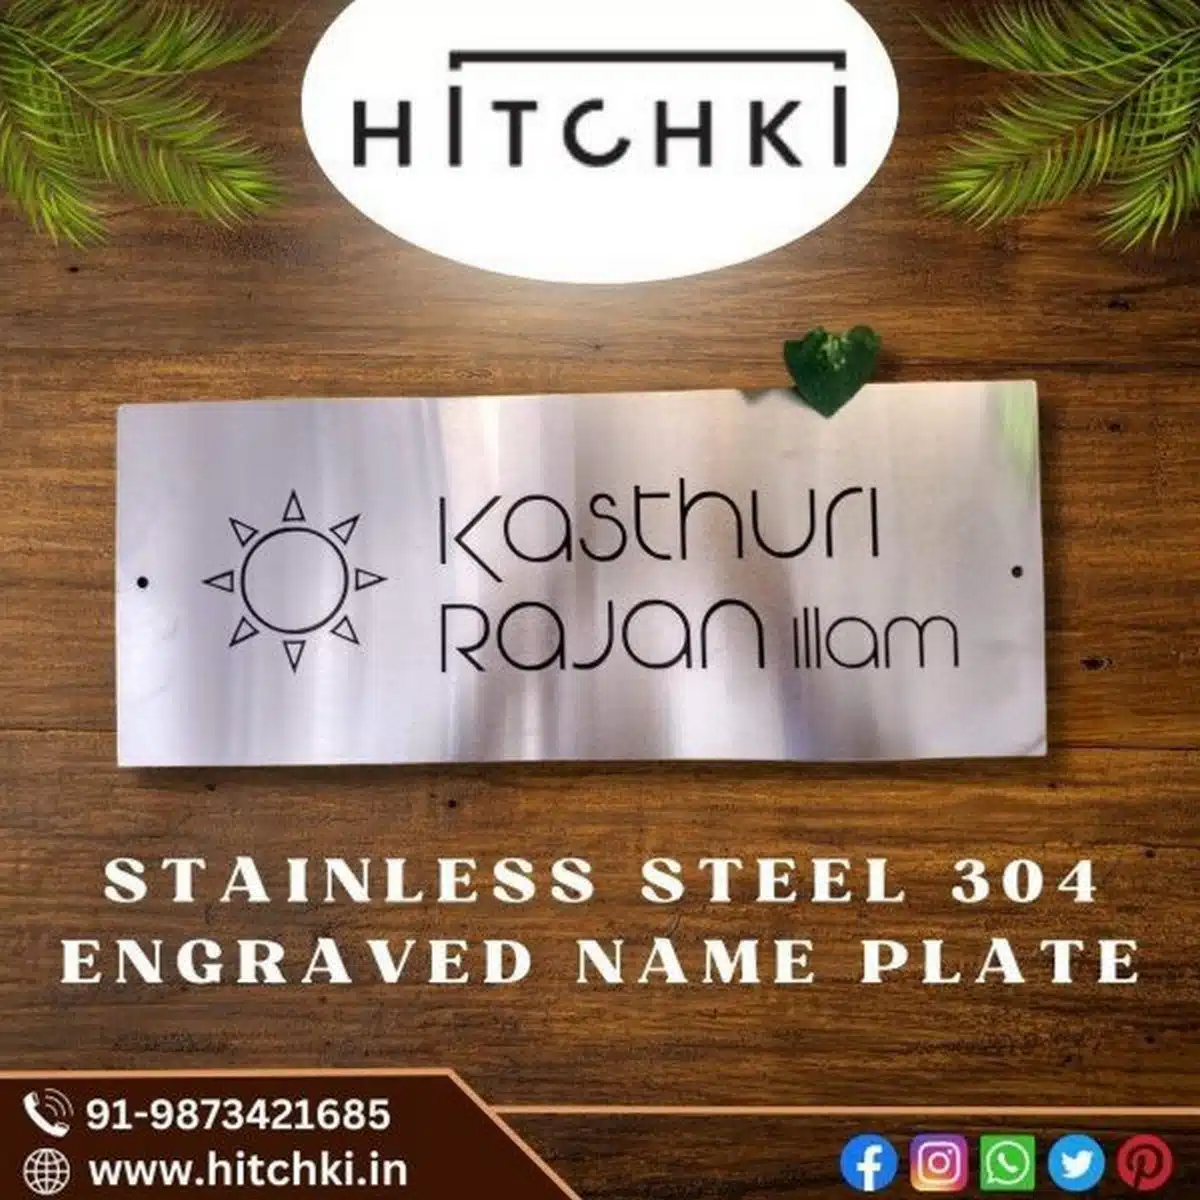 Stainless Steel Name Plate 304 Engraved online